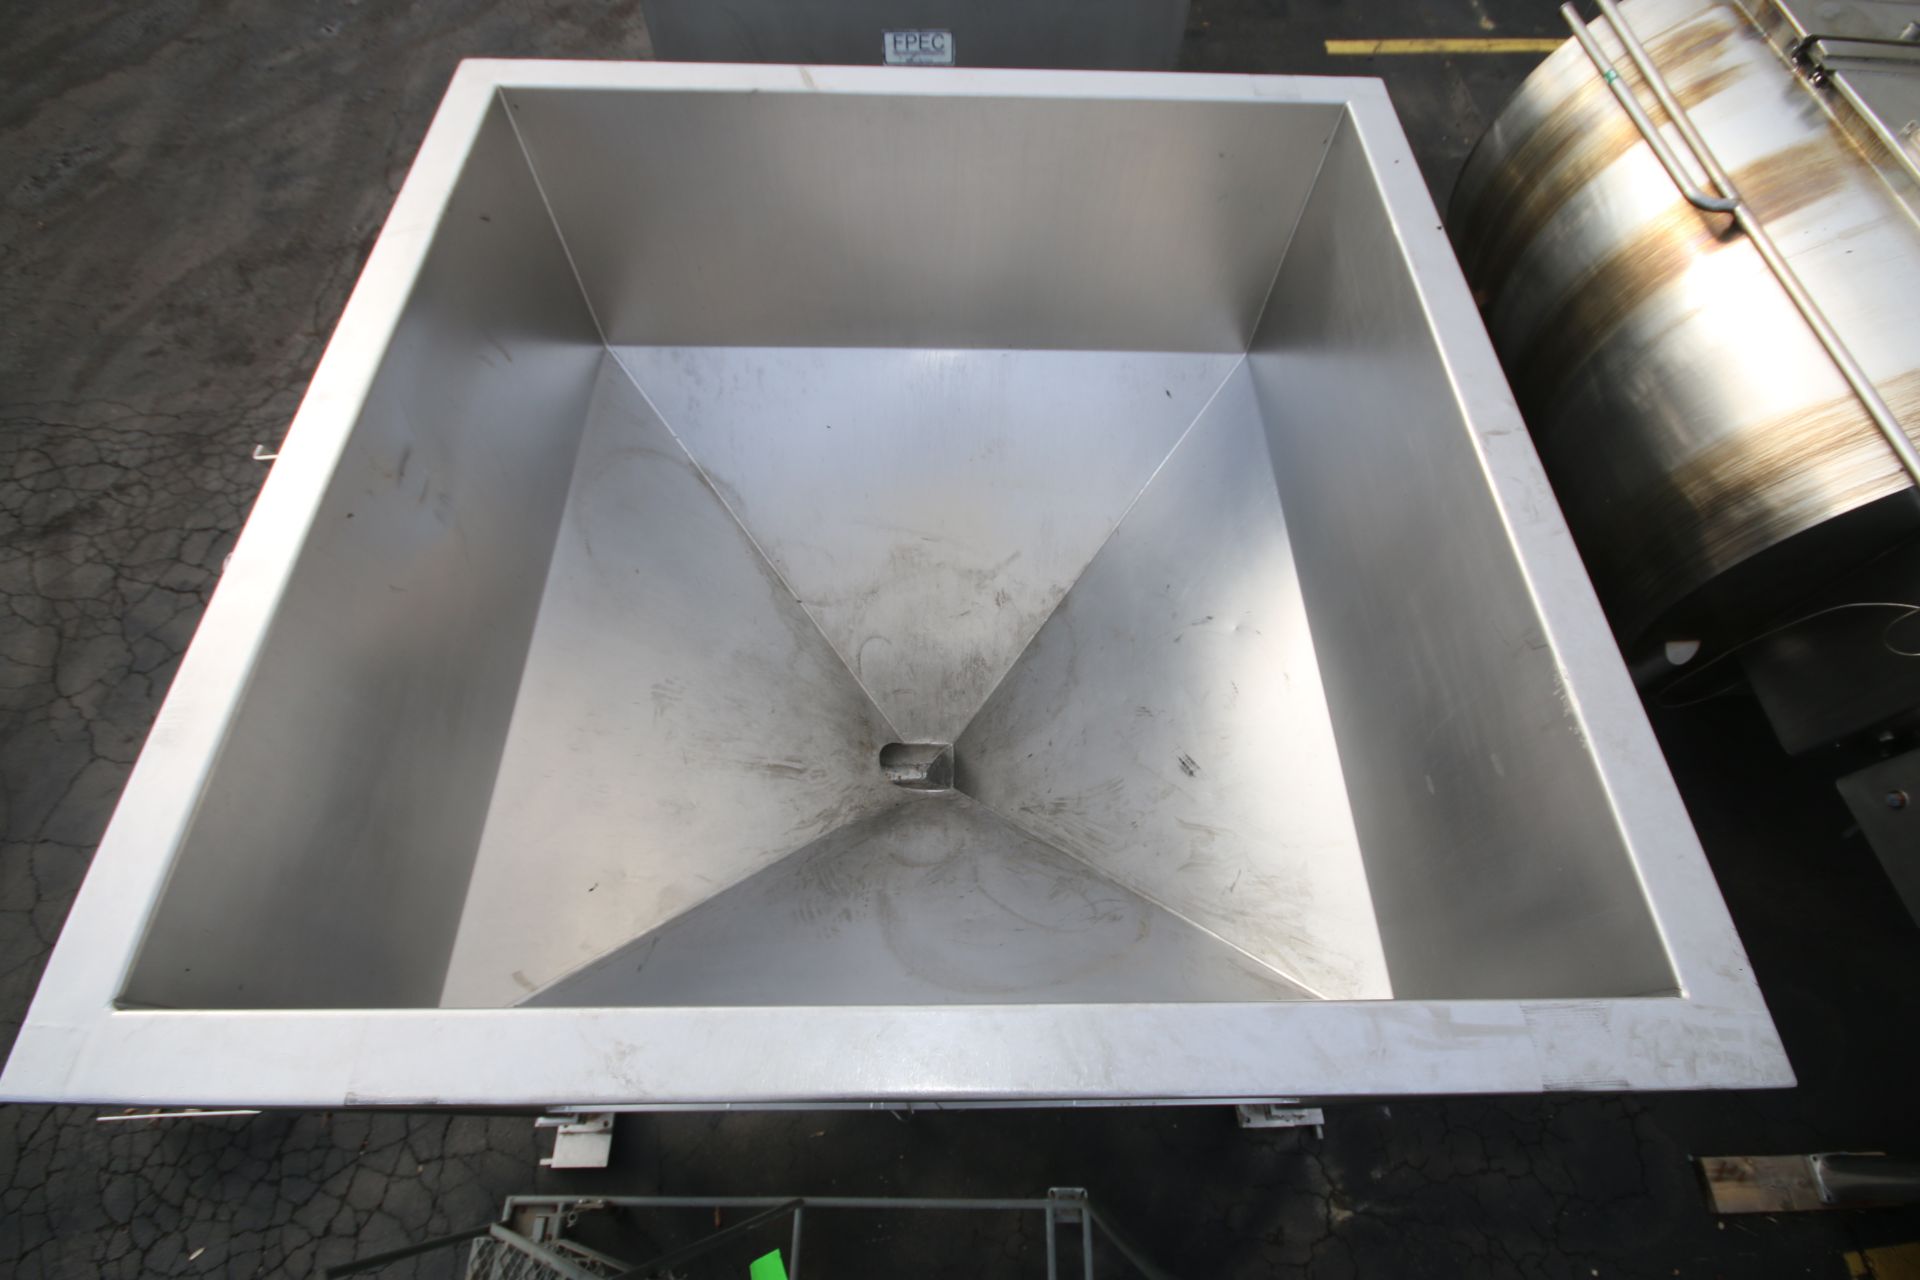 RMF 6 ft W x 6 ft L x 58" D S/S Feed Hopper, Model CT600, SN 32724, with 6" Clamp Type Discharge, - Image 5 of 8